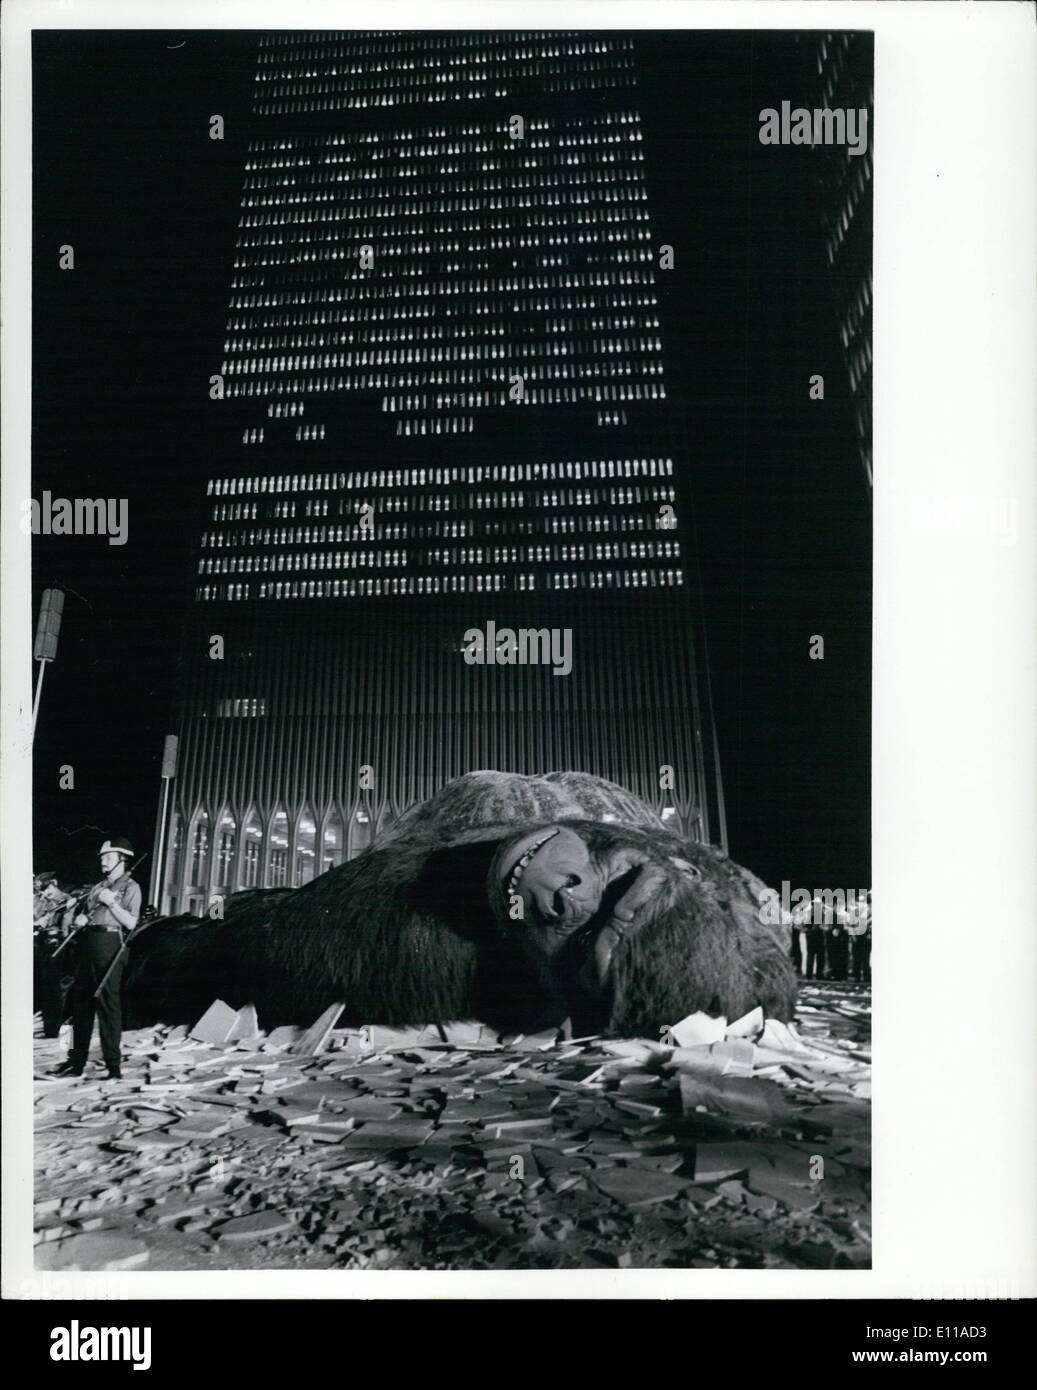 Jun. 06, 1976 - King Kong filming at World Trade Center new production by Dino de . Photo shows beauty: Jessica Lange. Stock Photo